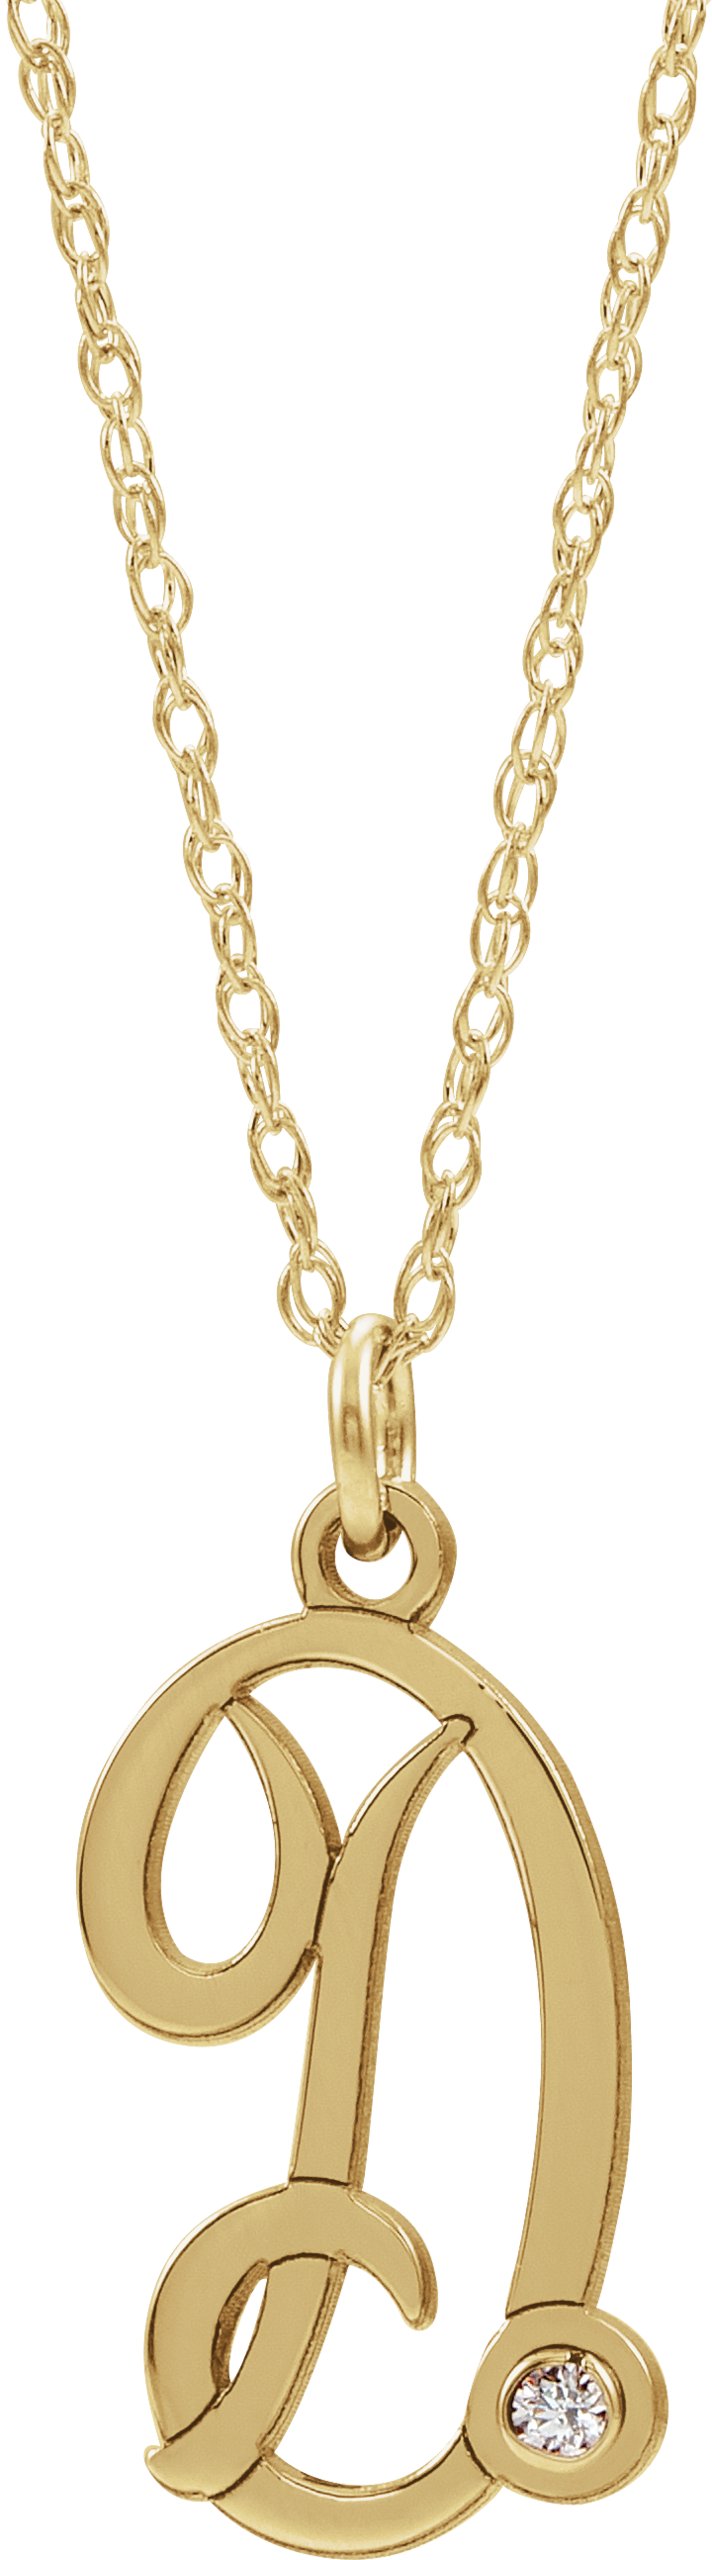 14K Yellow Gold-Plated .02 CT Diamond Script Initial D 16-18" Necklace